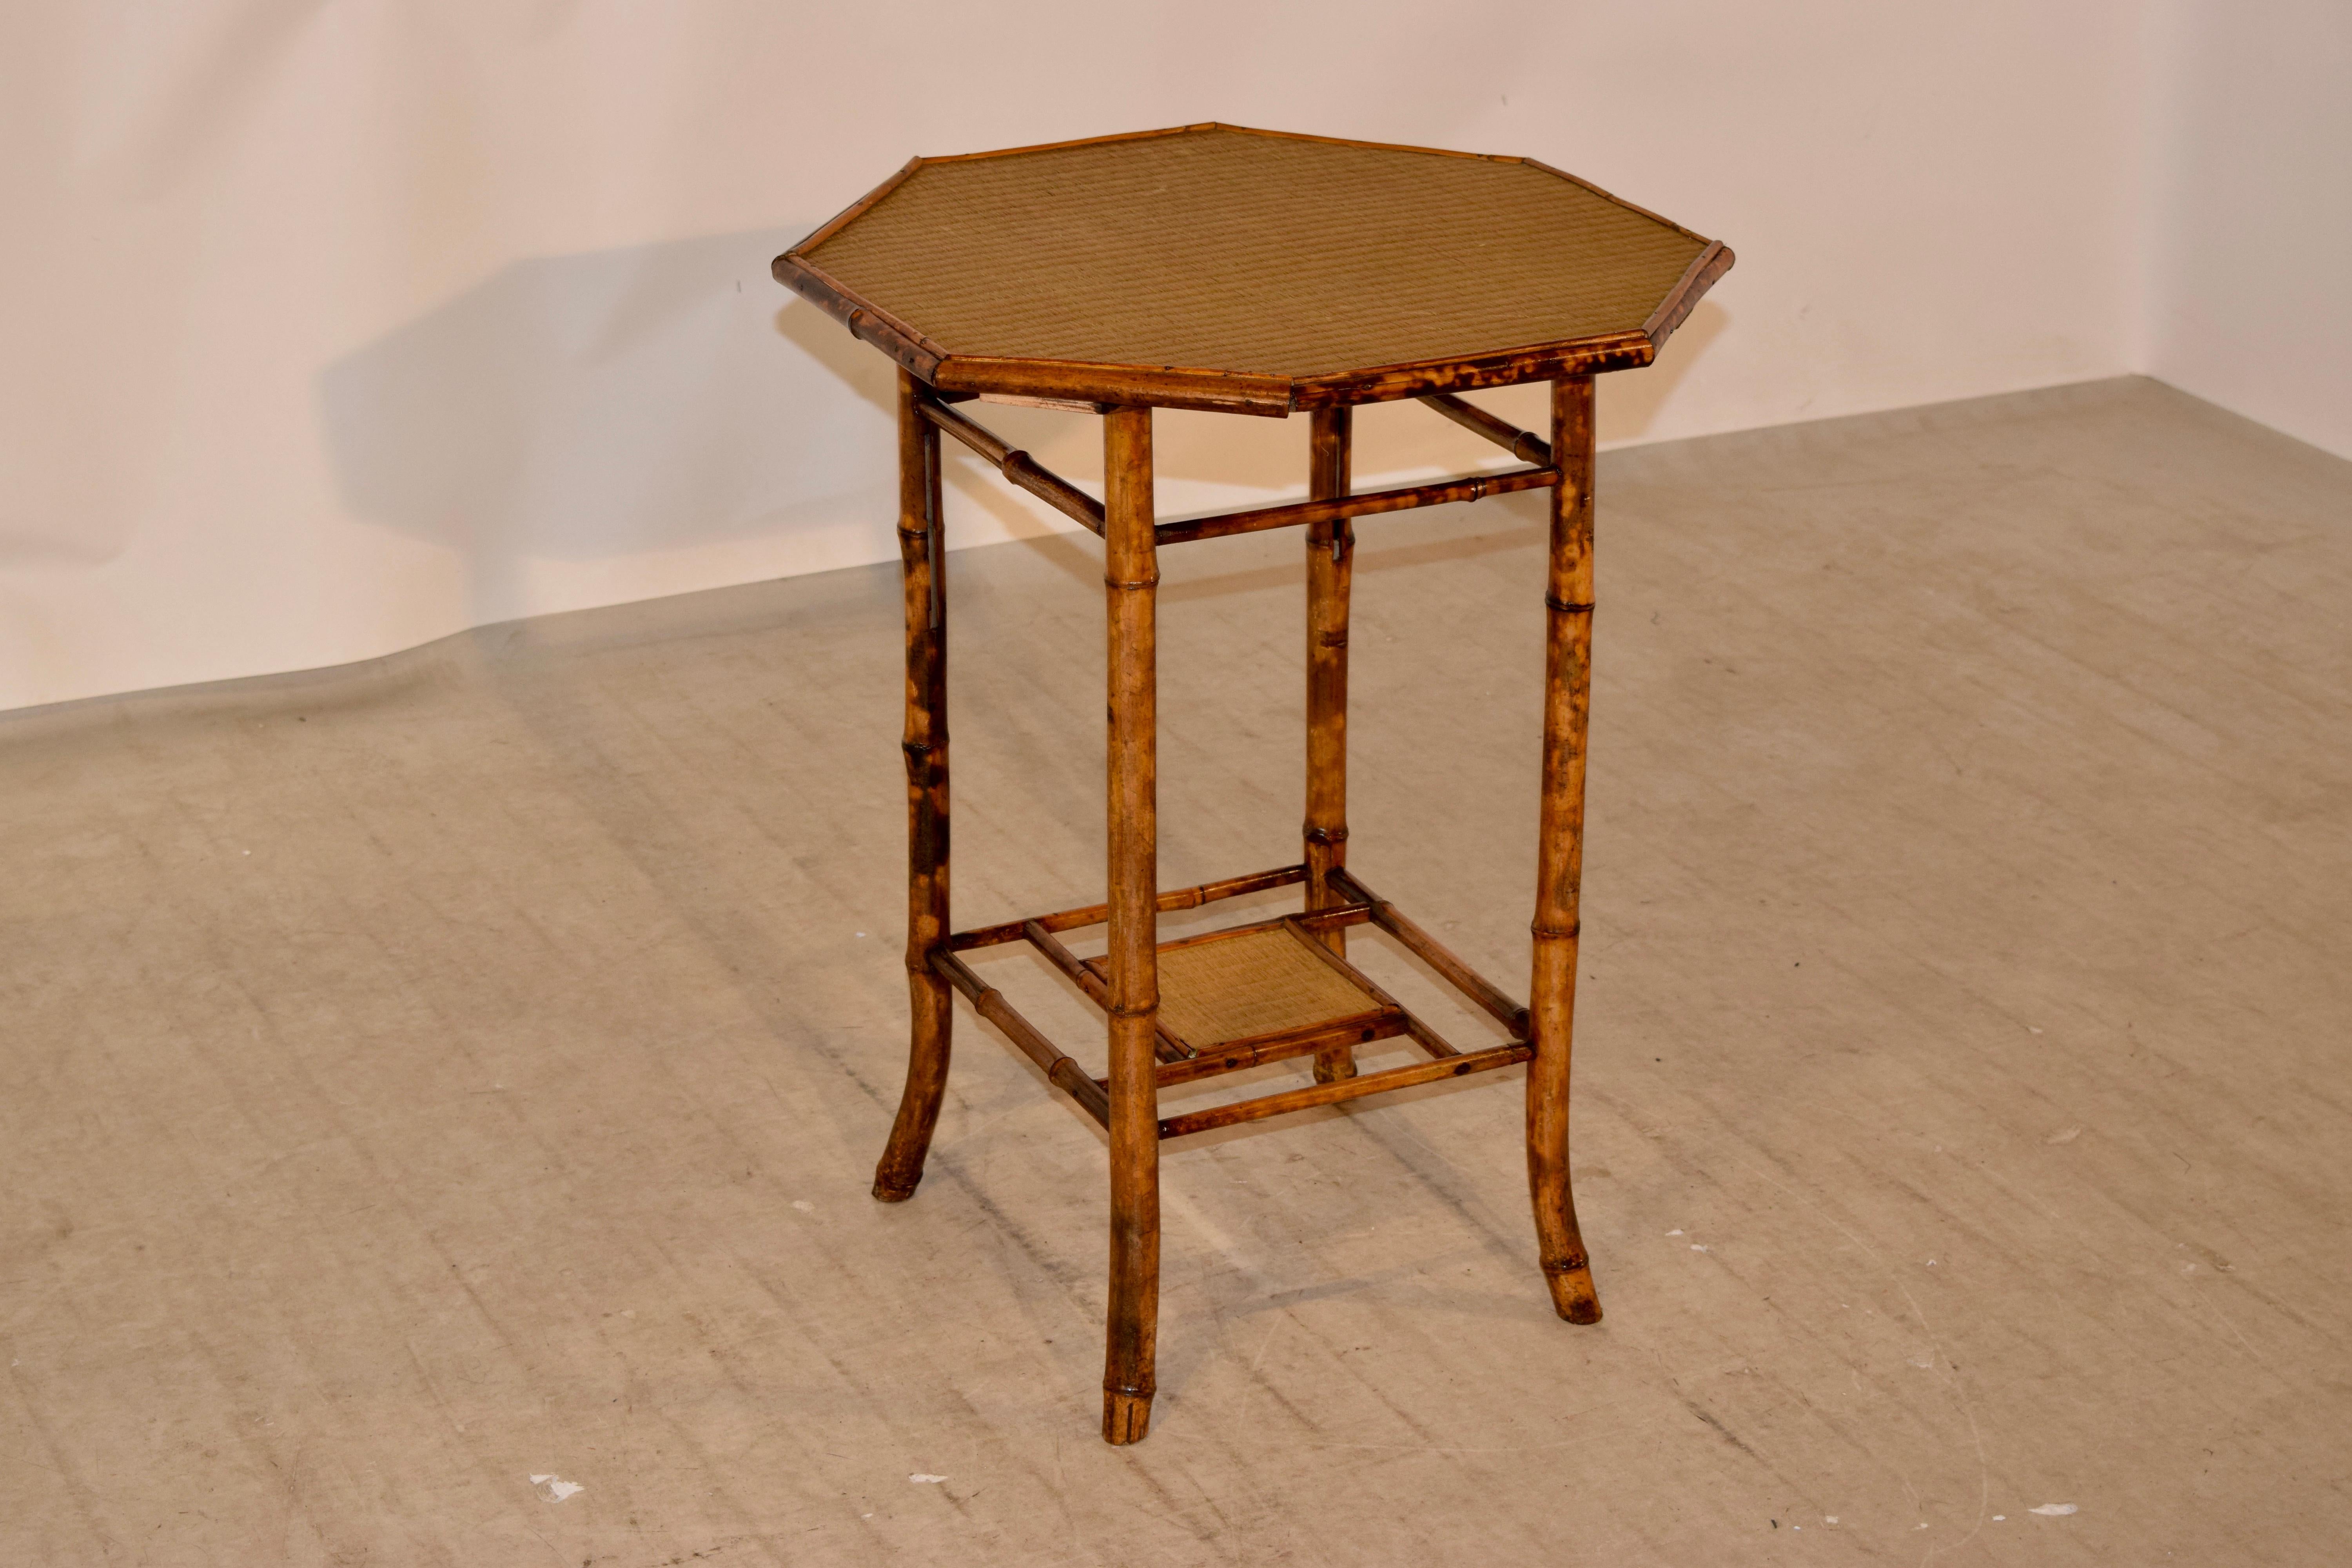 19th century French tortoise bamboo table with rush covered top and lower shelf. Lovely splayed legs.